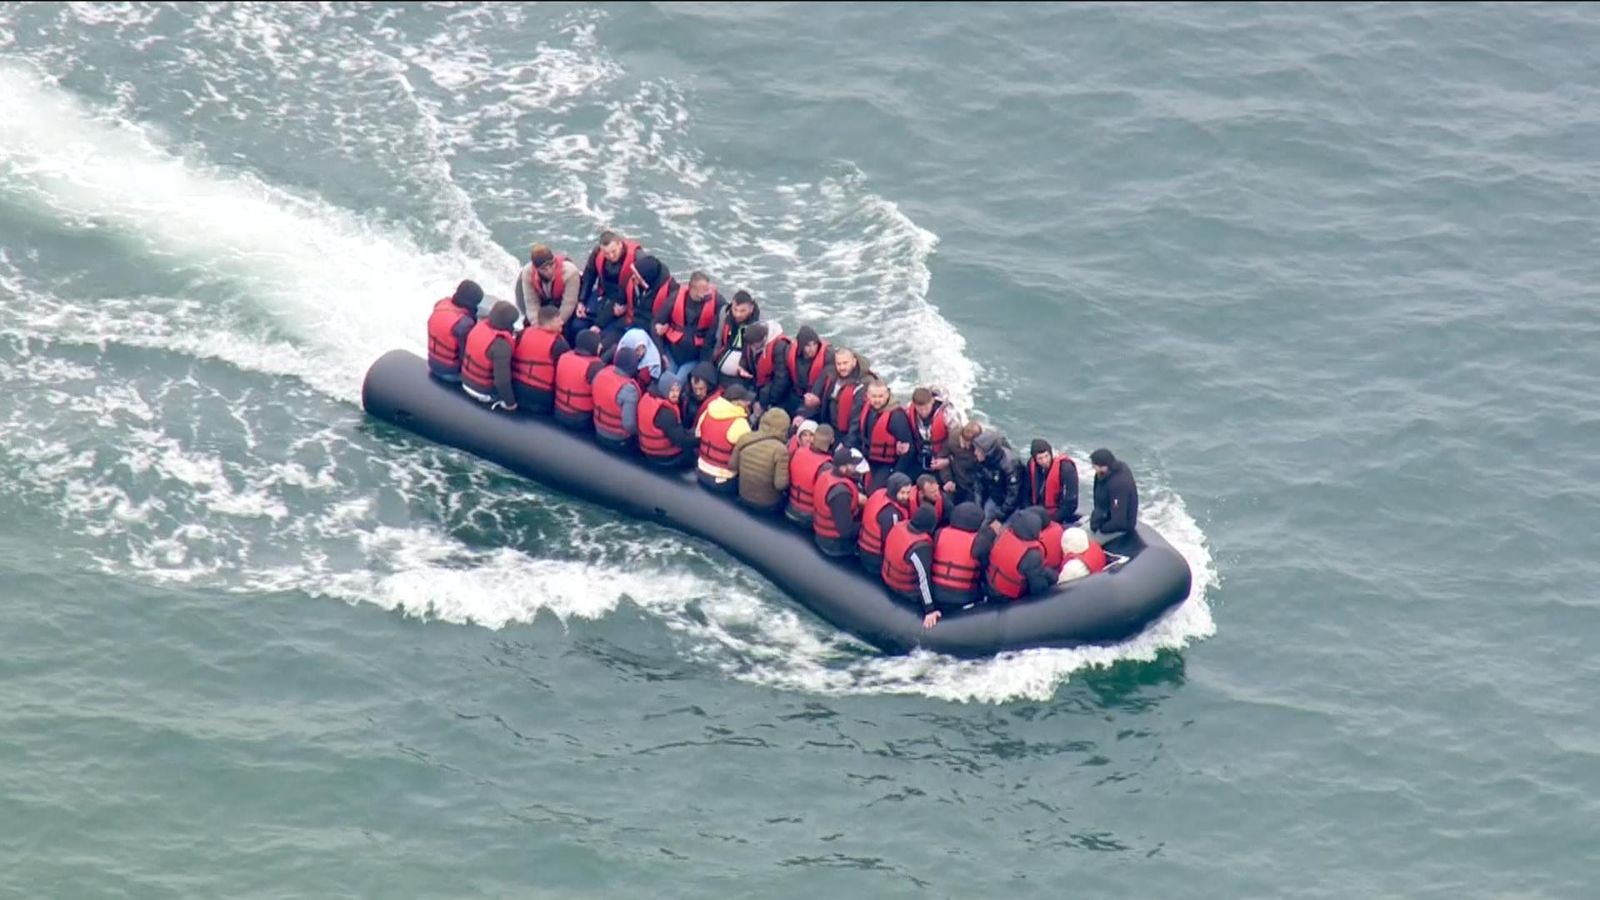 Wasps on the waves: illegal migrants crossing the English Channel